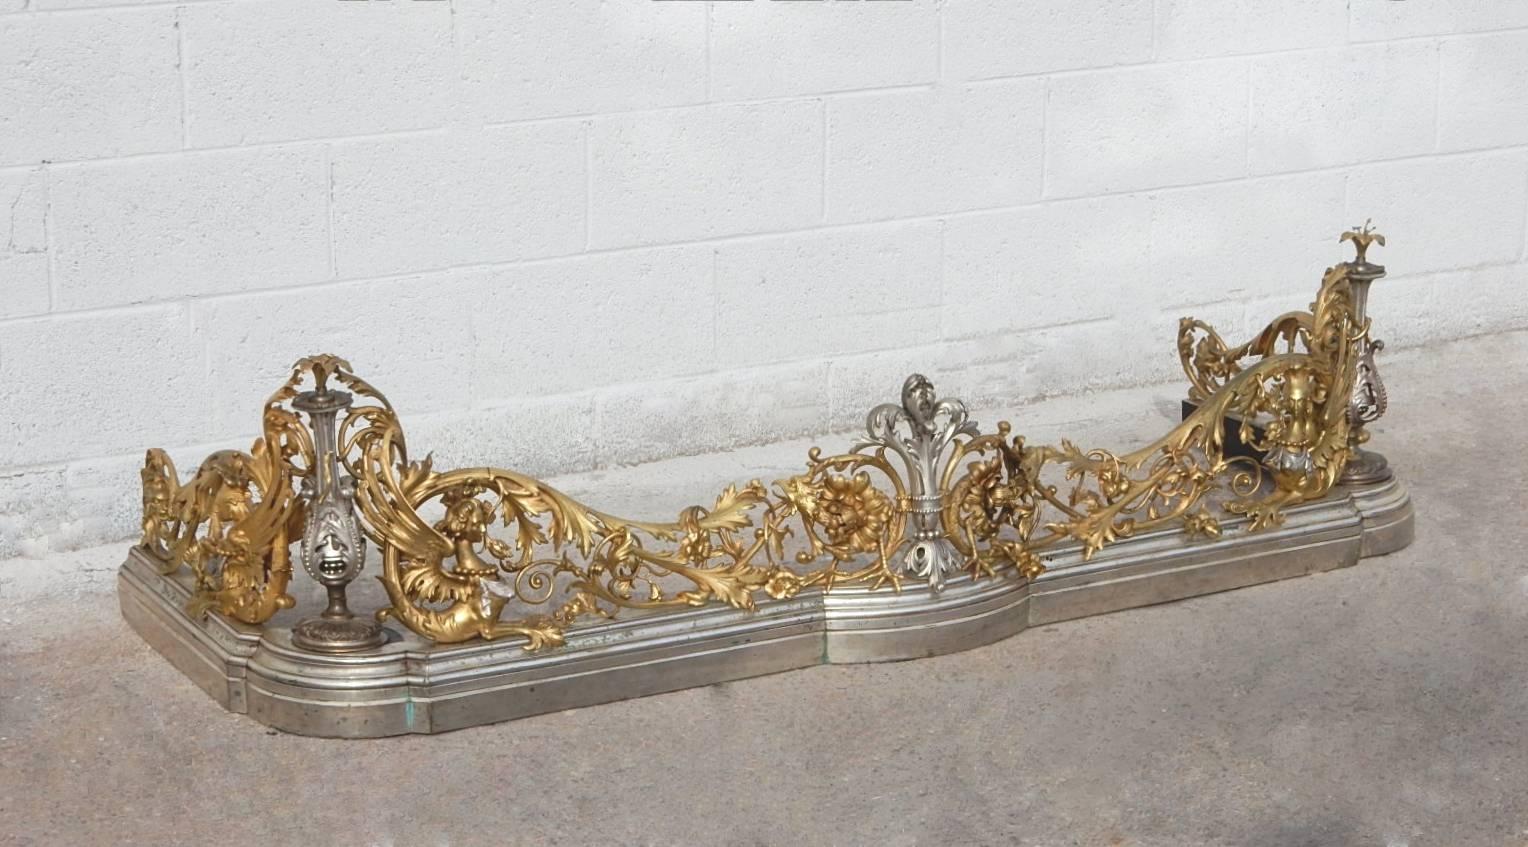 19th century gilded bronze Italian fireplace Fender by master sculptor Giuseppe Speluzzi (1827-1890) of Milan.
Magnificent work of art, four of Dante's Harpies adorn the side corners while four fierce phoenix guard each side of the centre fleur de